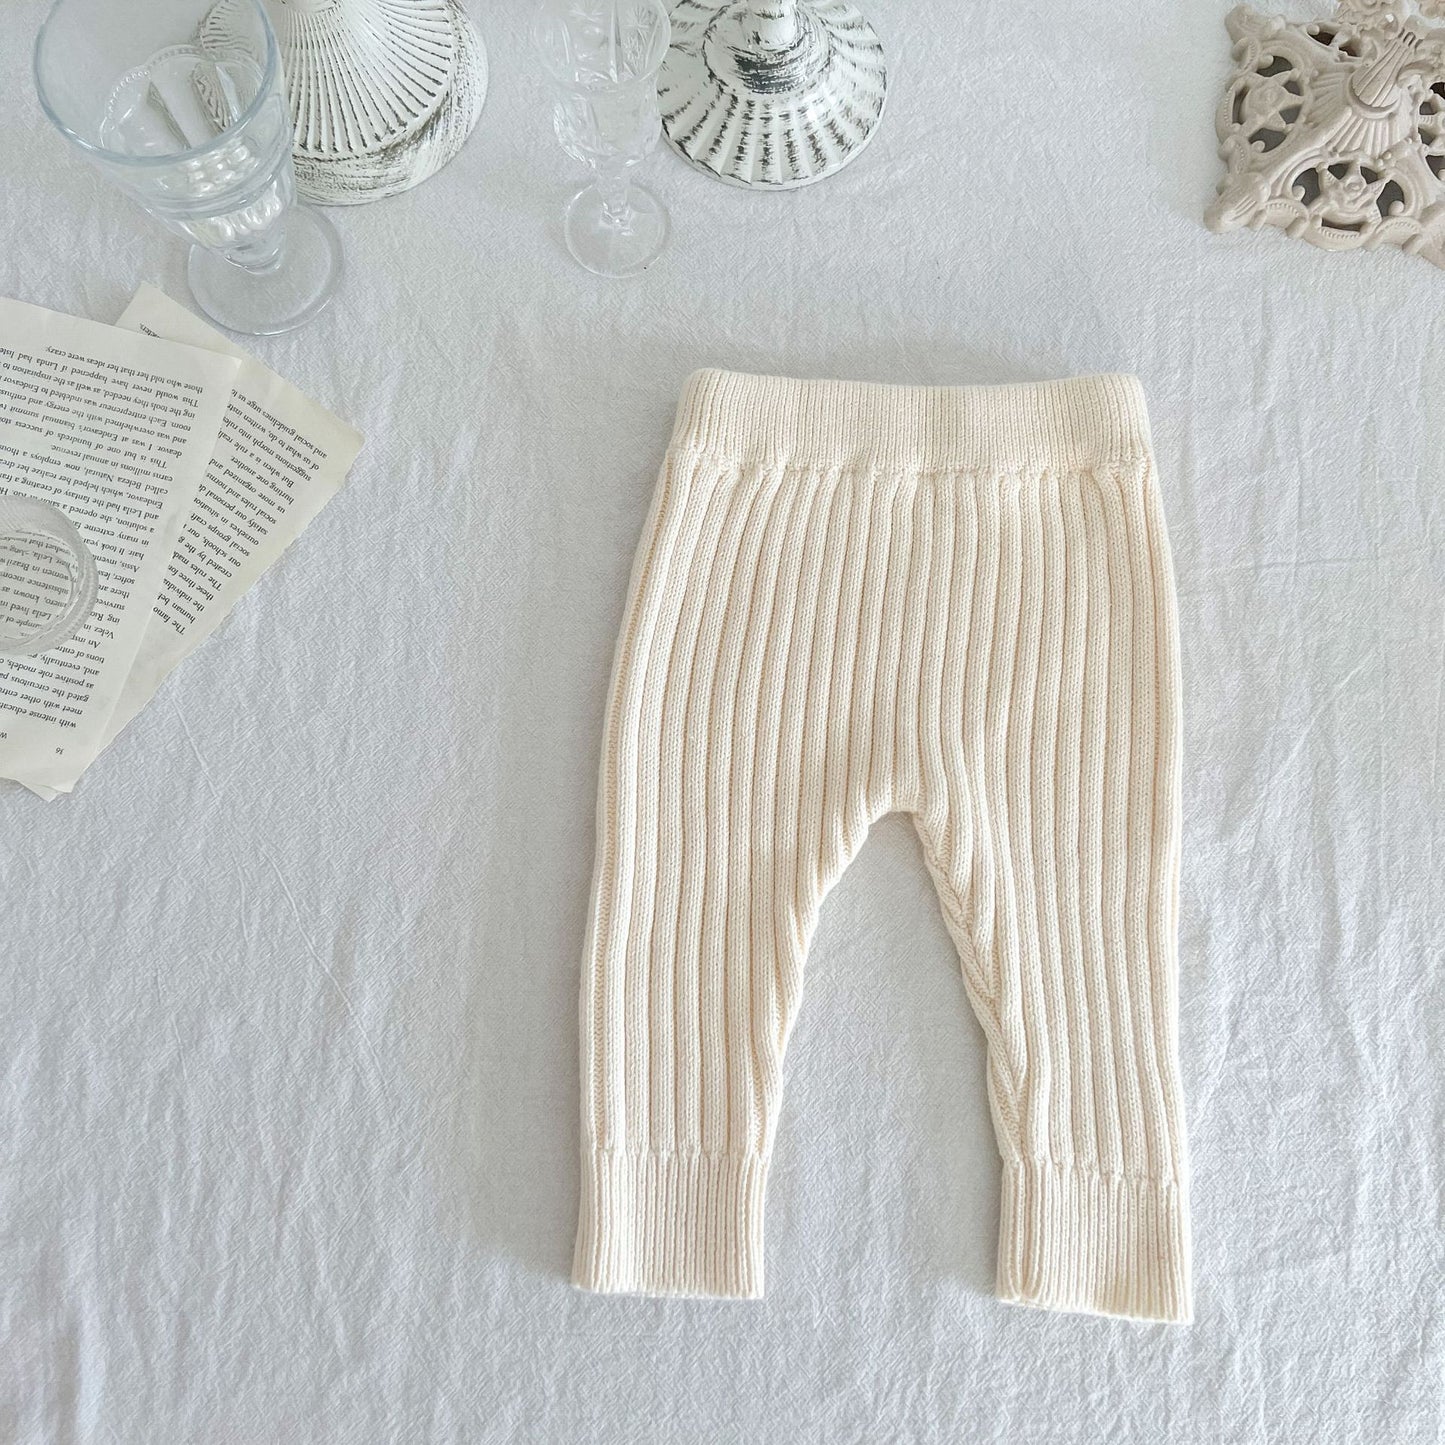 Stretchy Knitted Cotton Baby Leggings